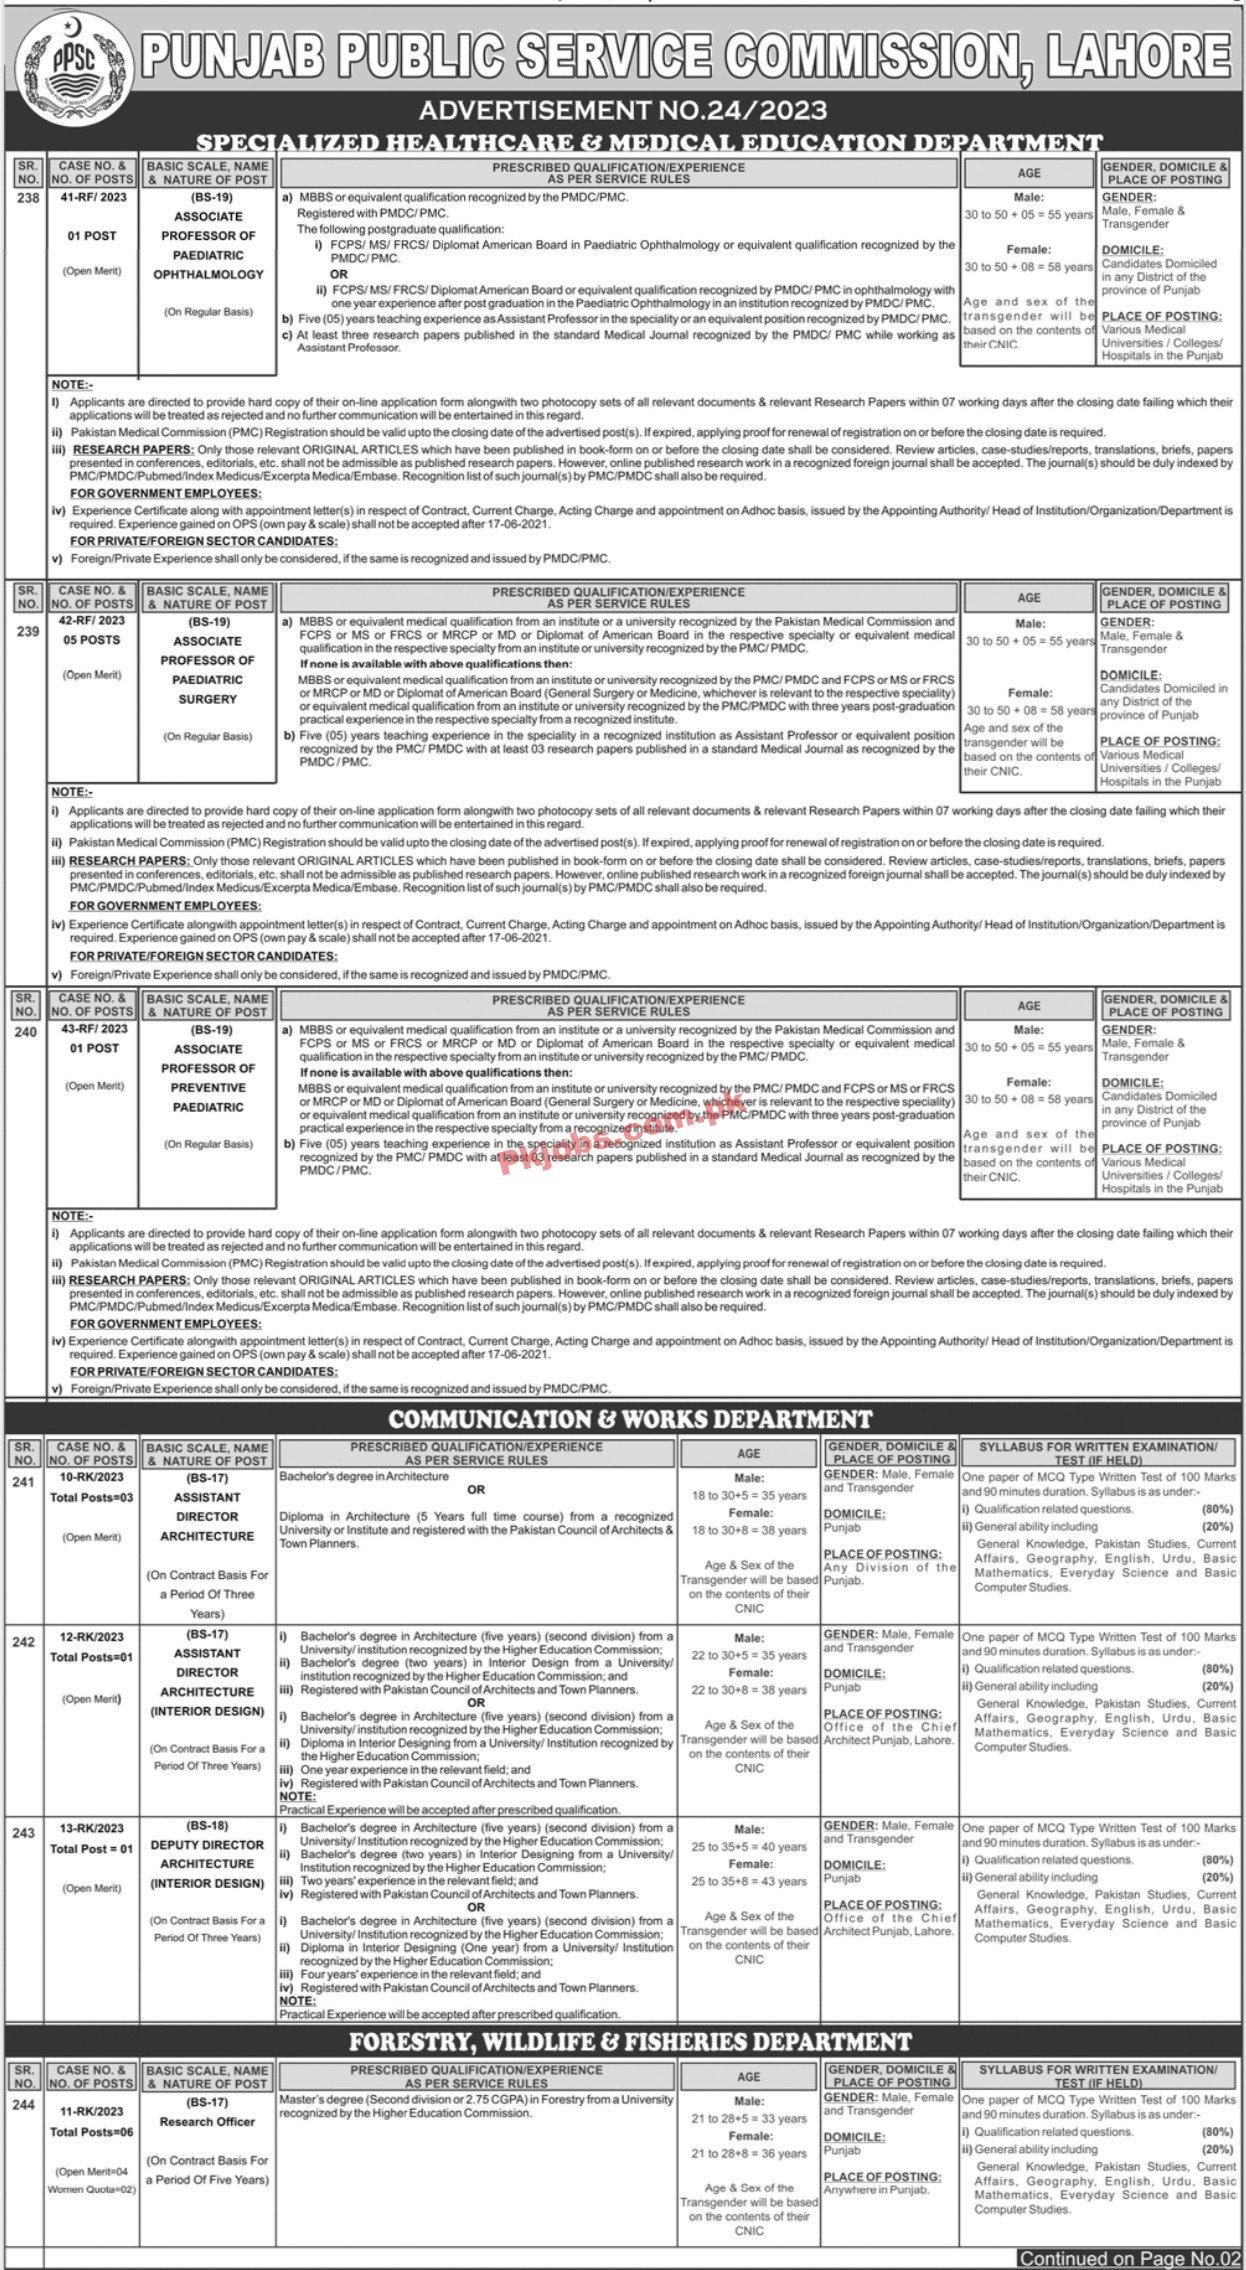 Latest PPSC Jobs | Jobs Advertisement No 24/2023 At PPSC